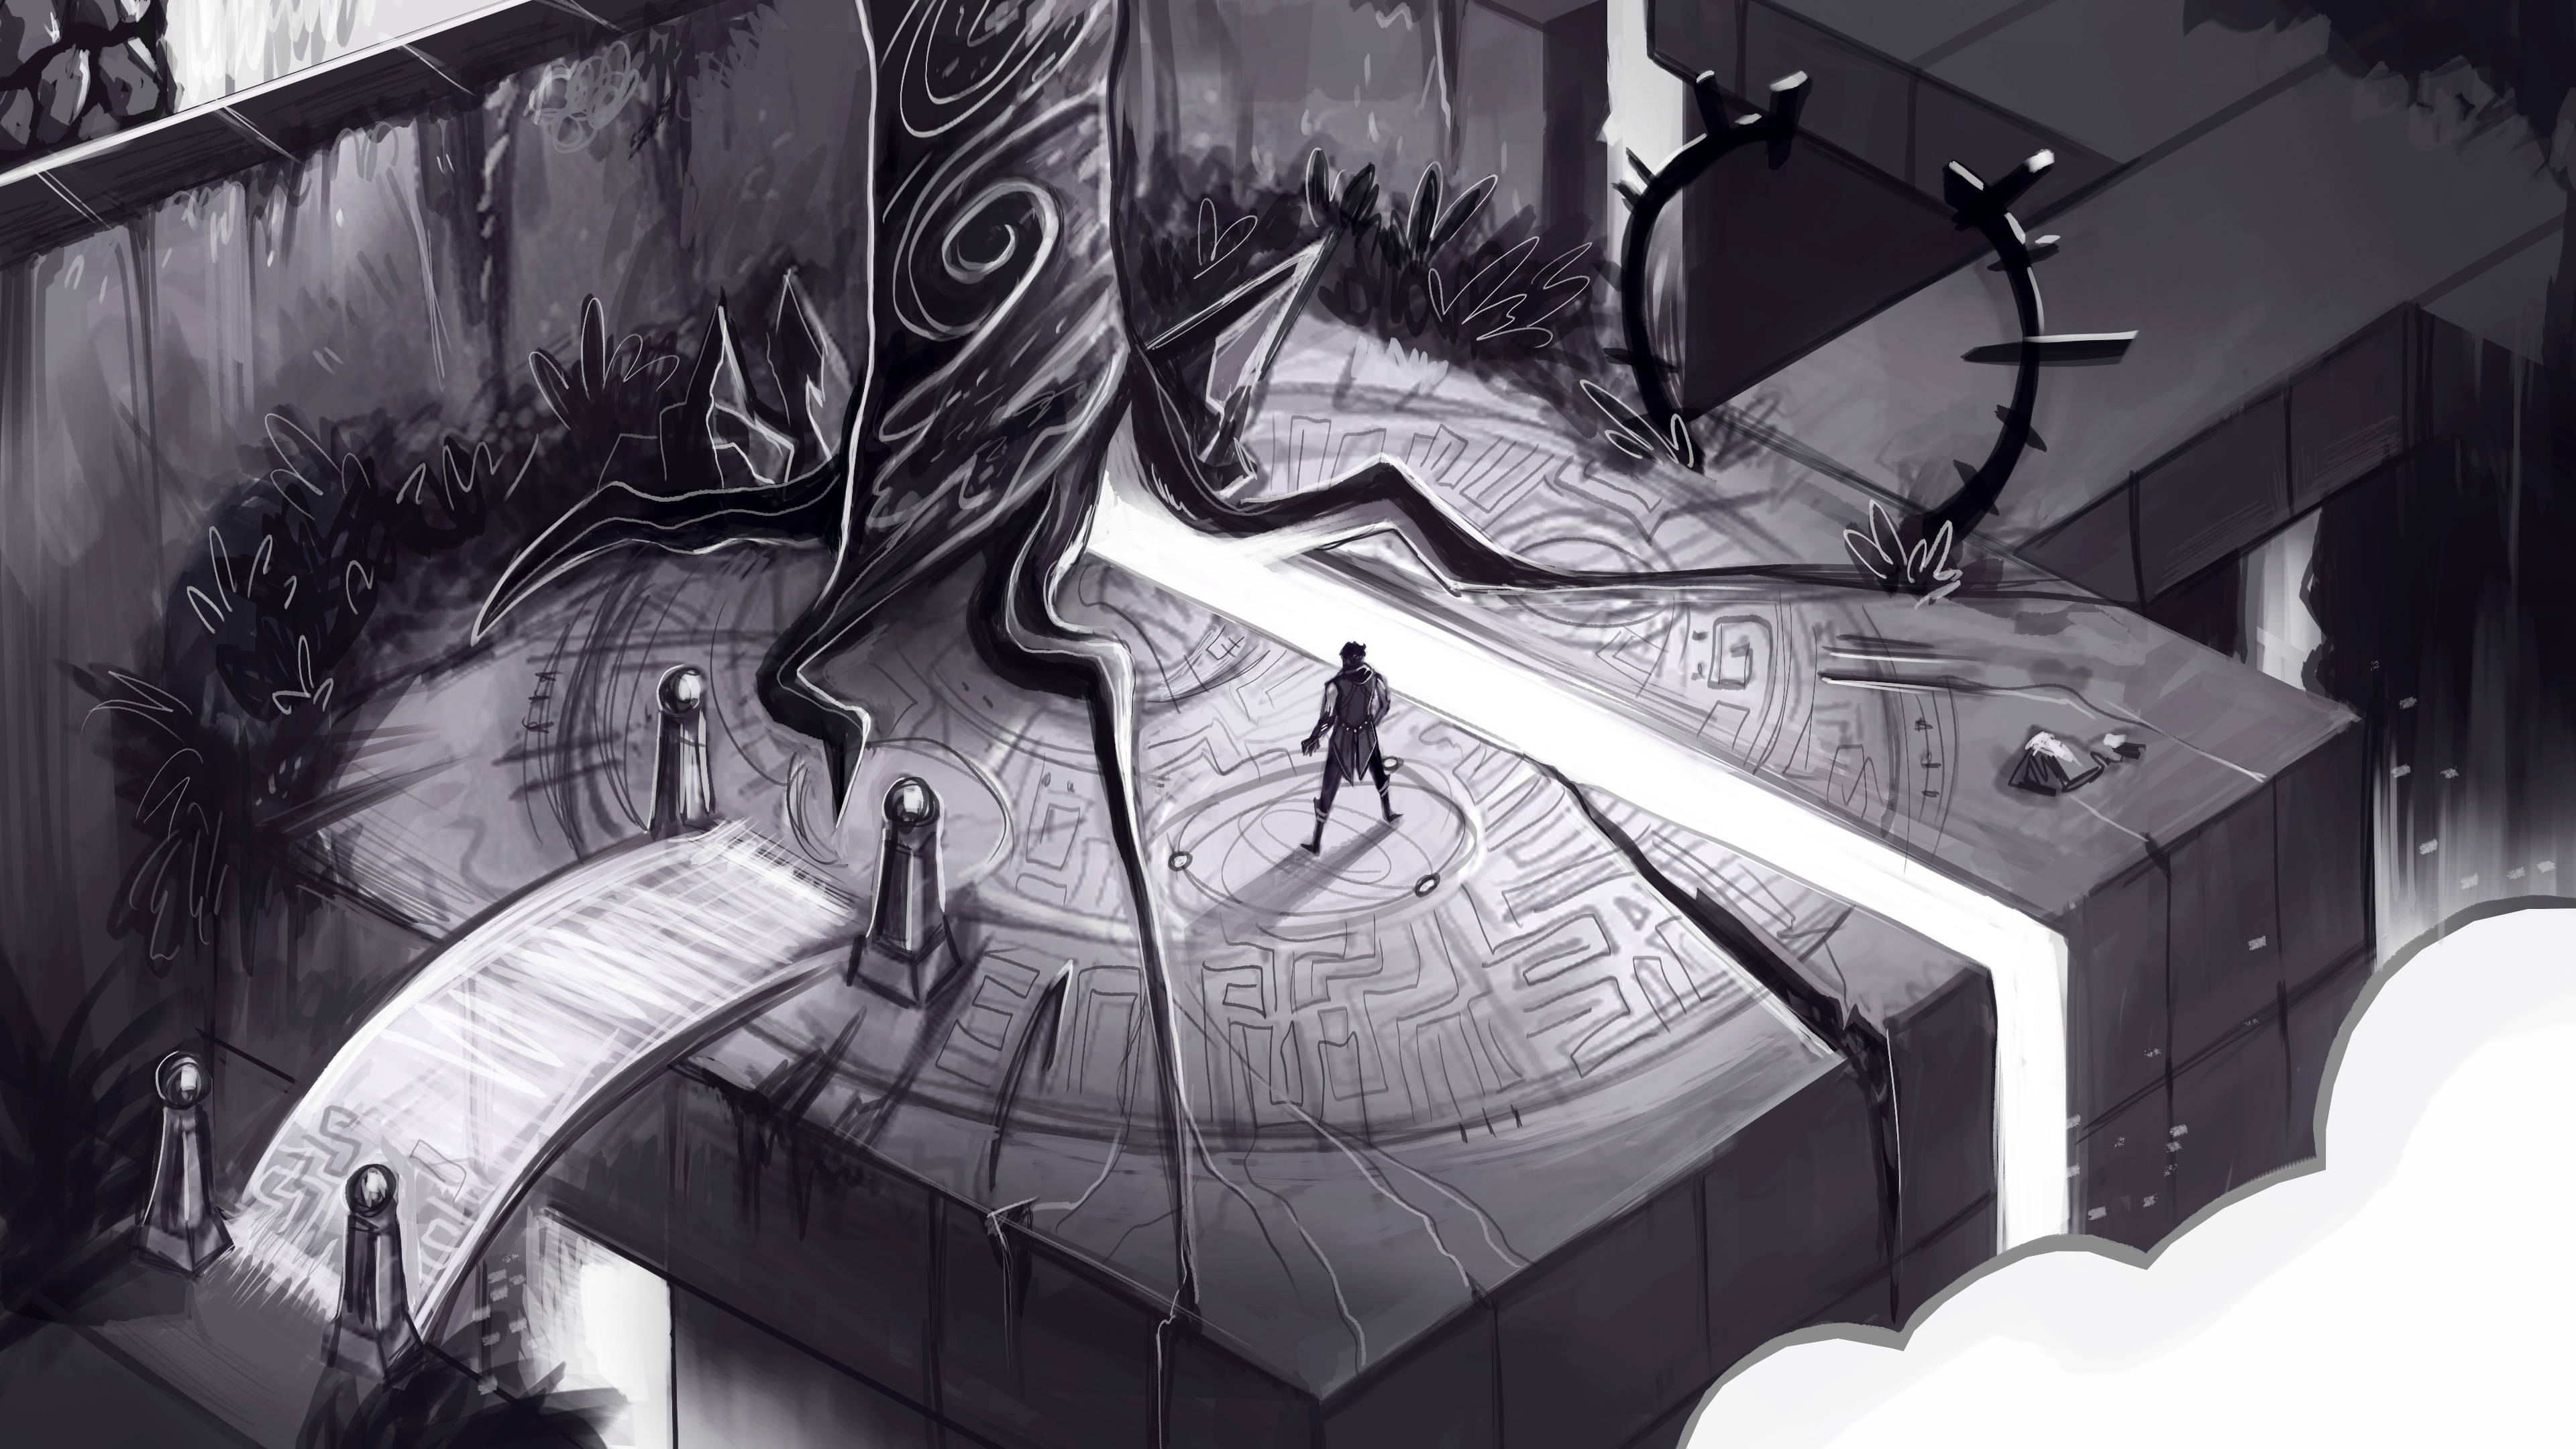 Large sketch from thumbnails.